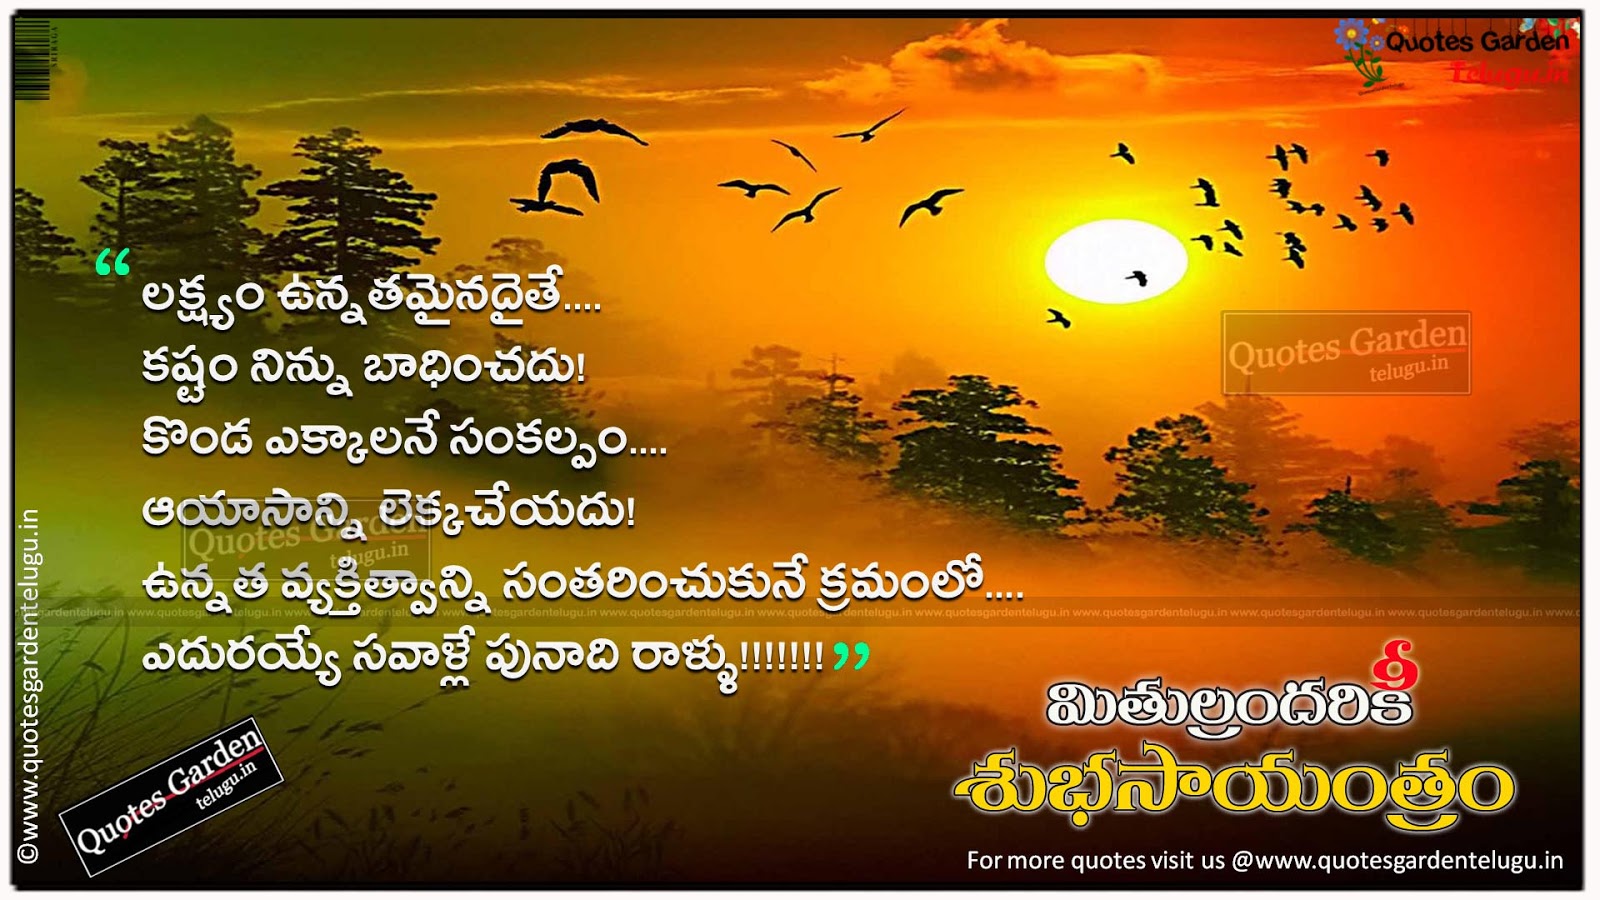 Telugu good evening Quotes With HD wallpapers | QUOTES GARDEN ...